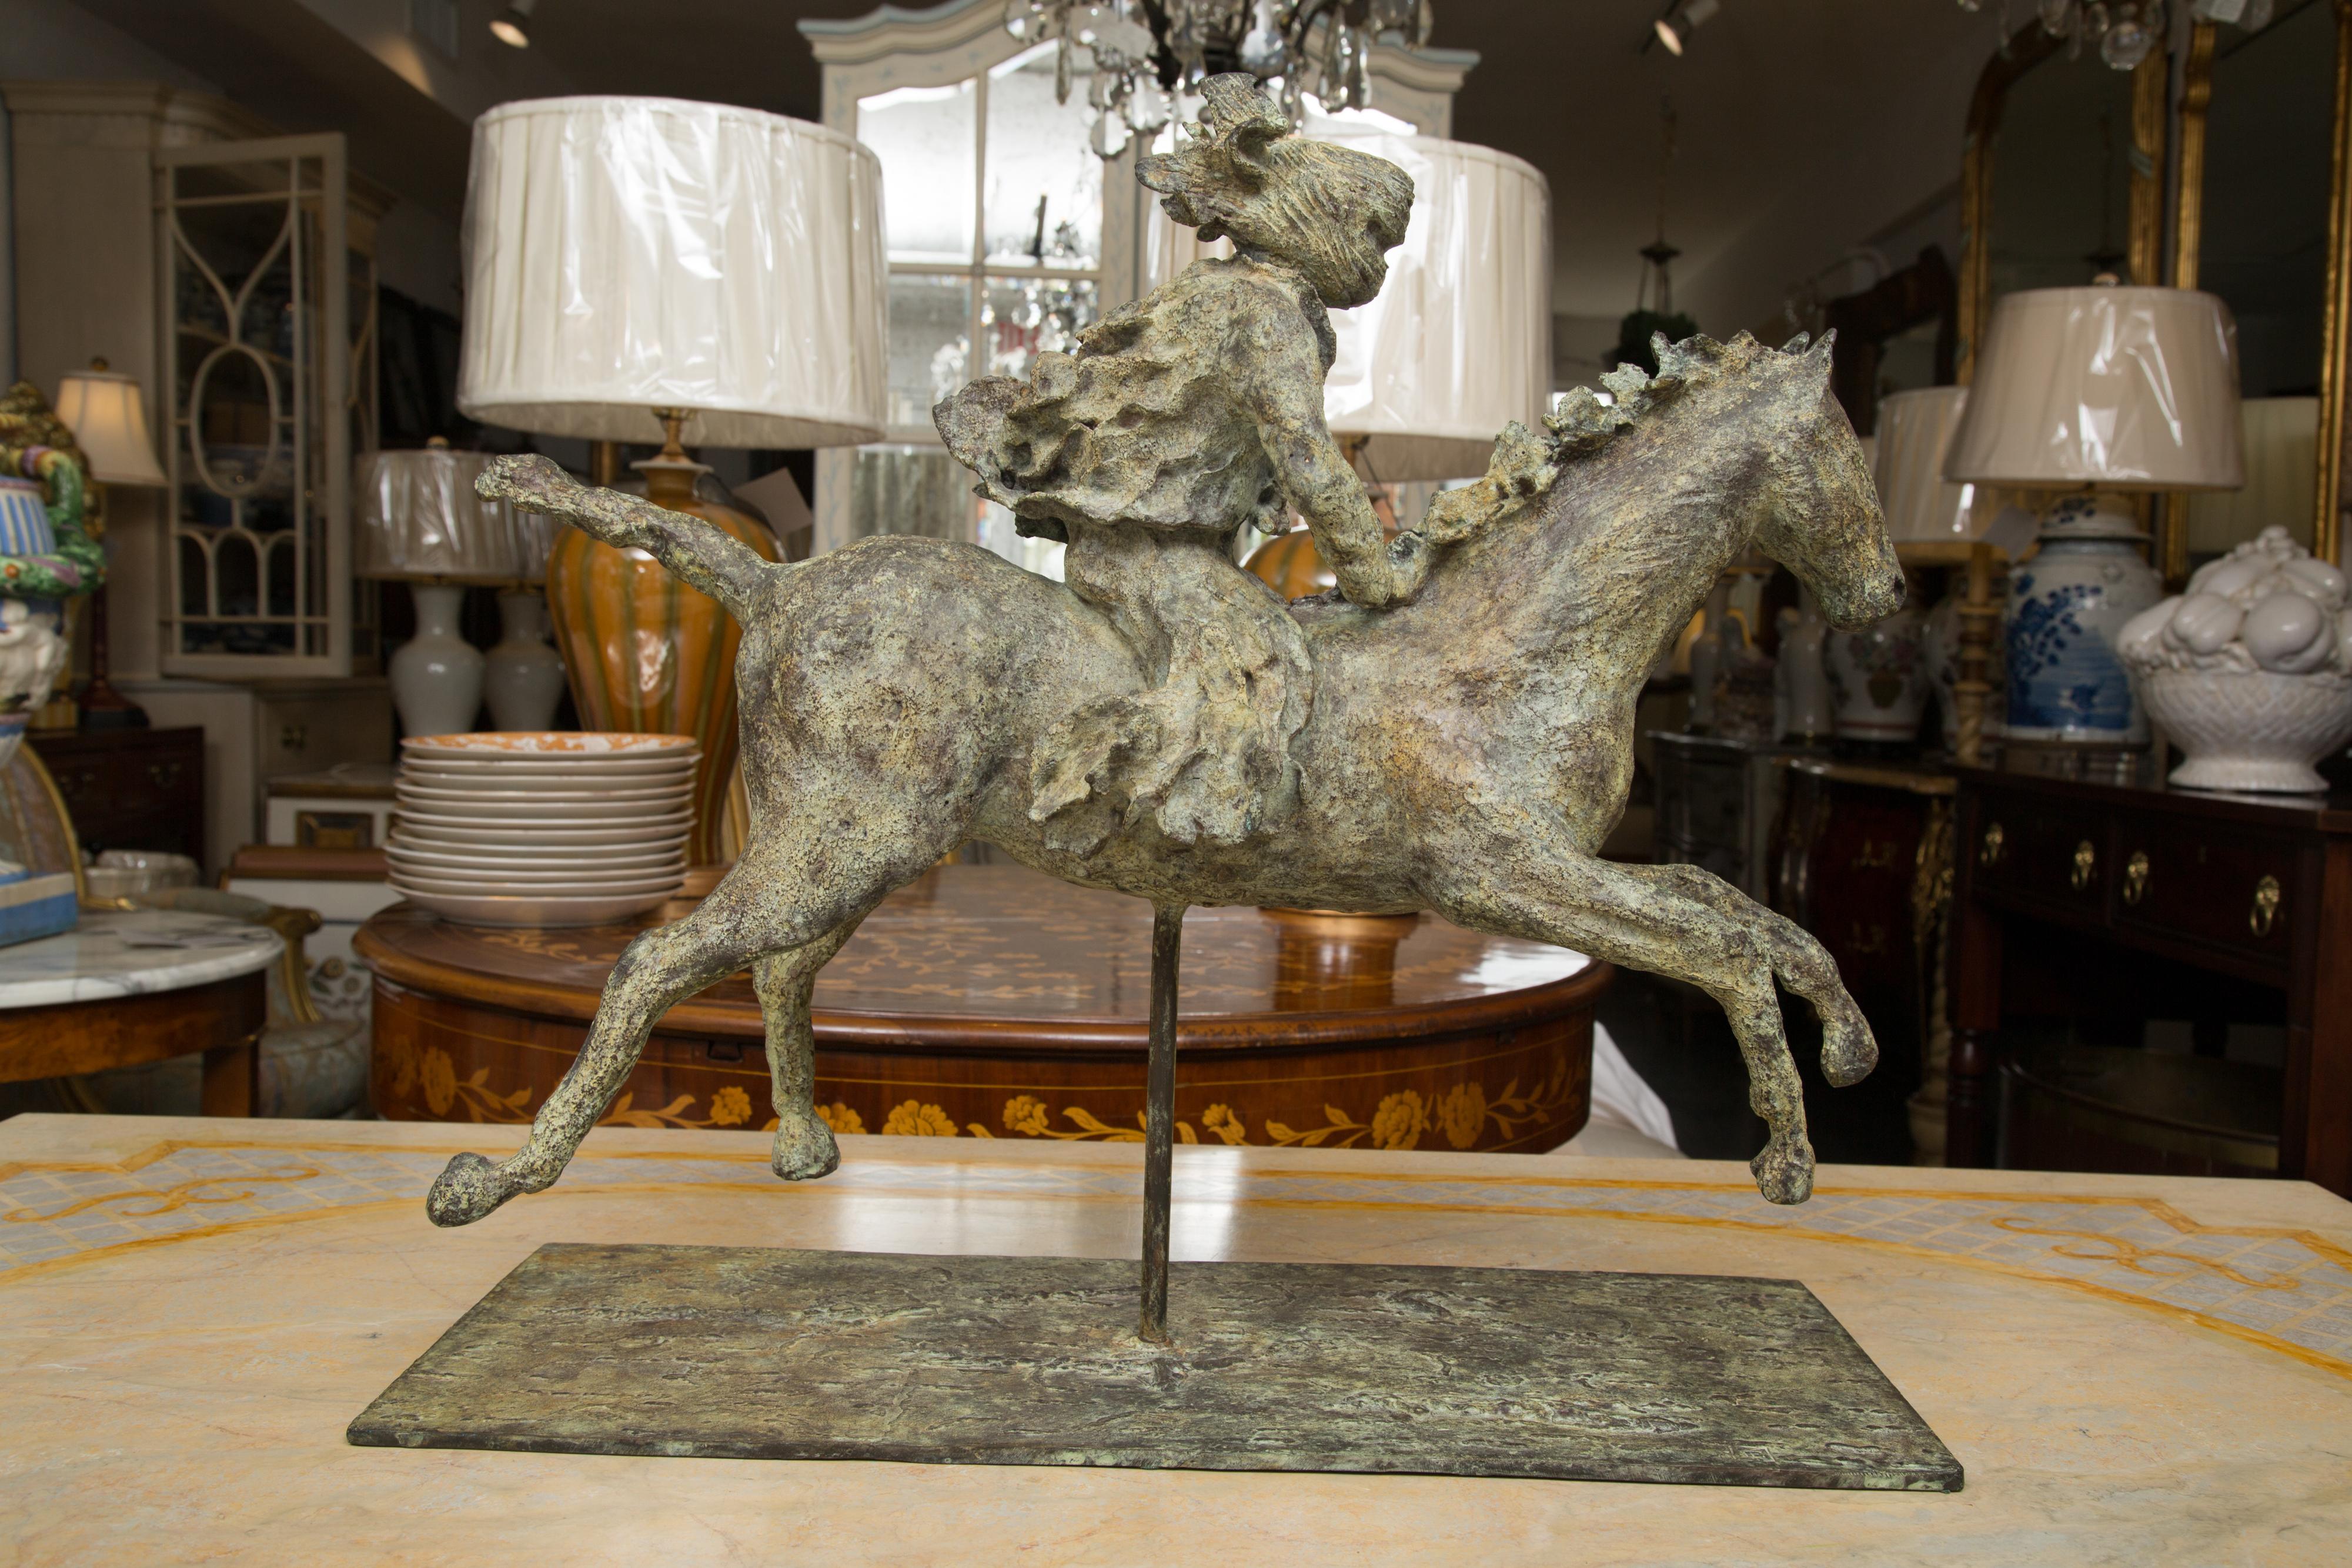 Hand-Crafted Turaeg Riding Horse on Metal Stand by Sculptor Lara